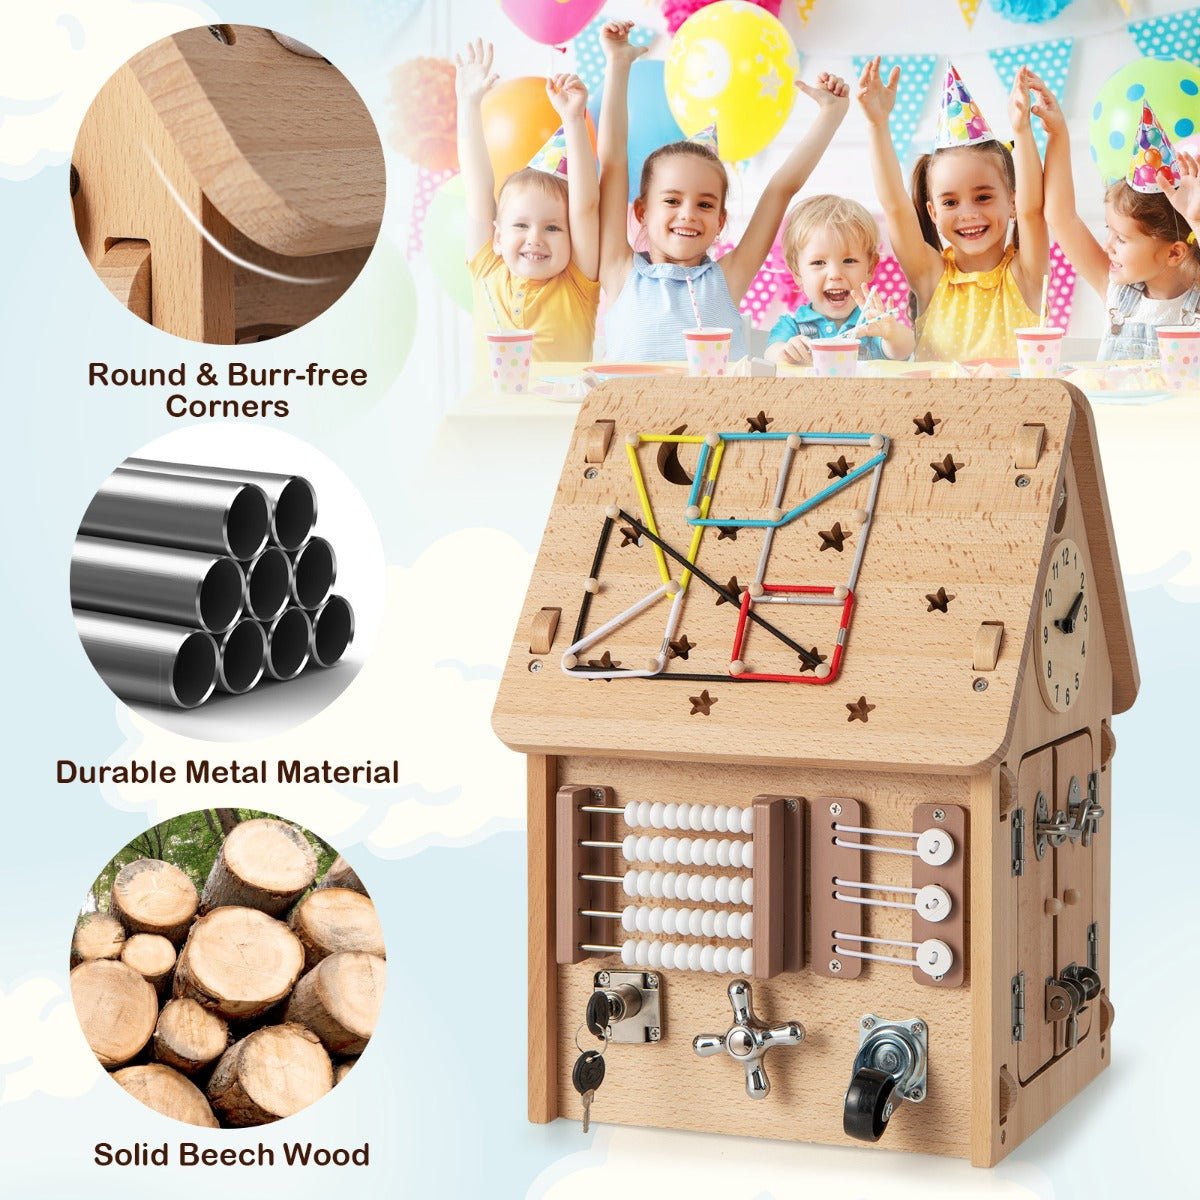 Quality Playtime Fun with Multi-purpose Busy House